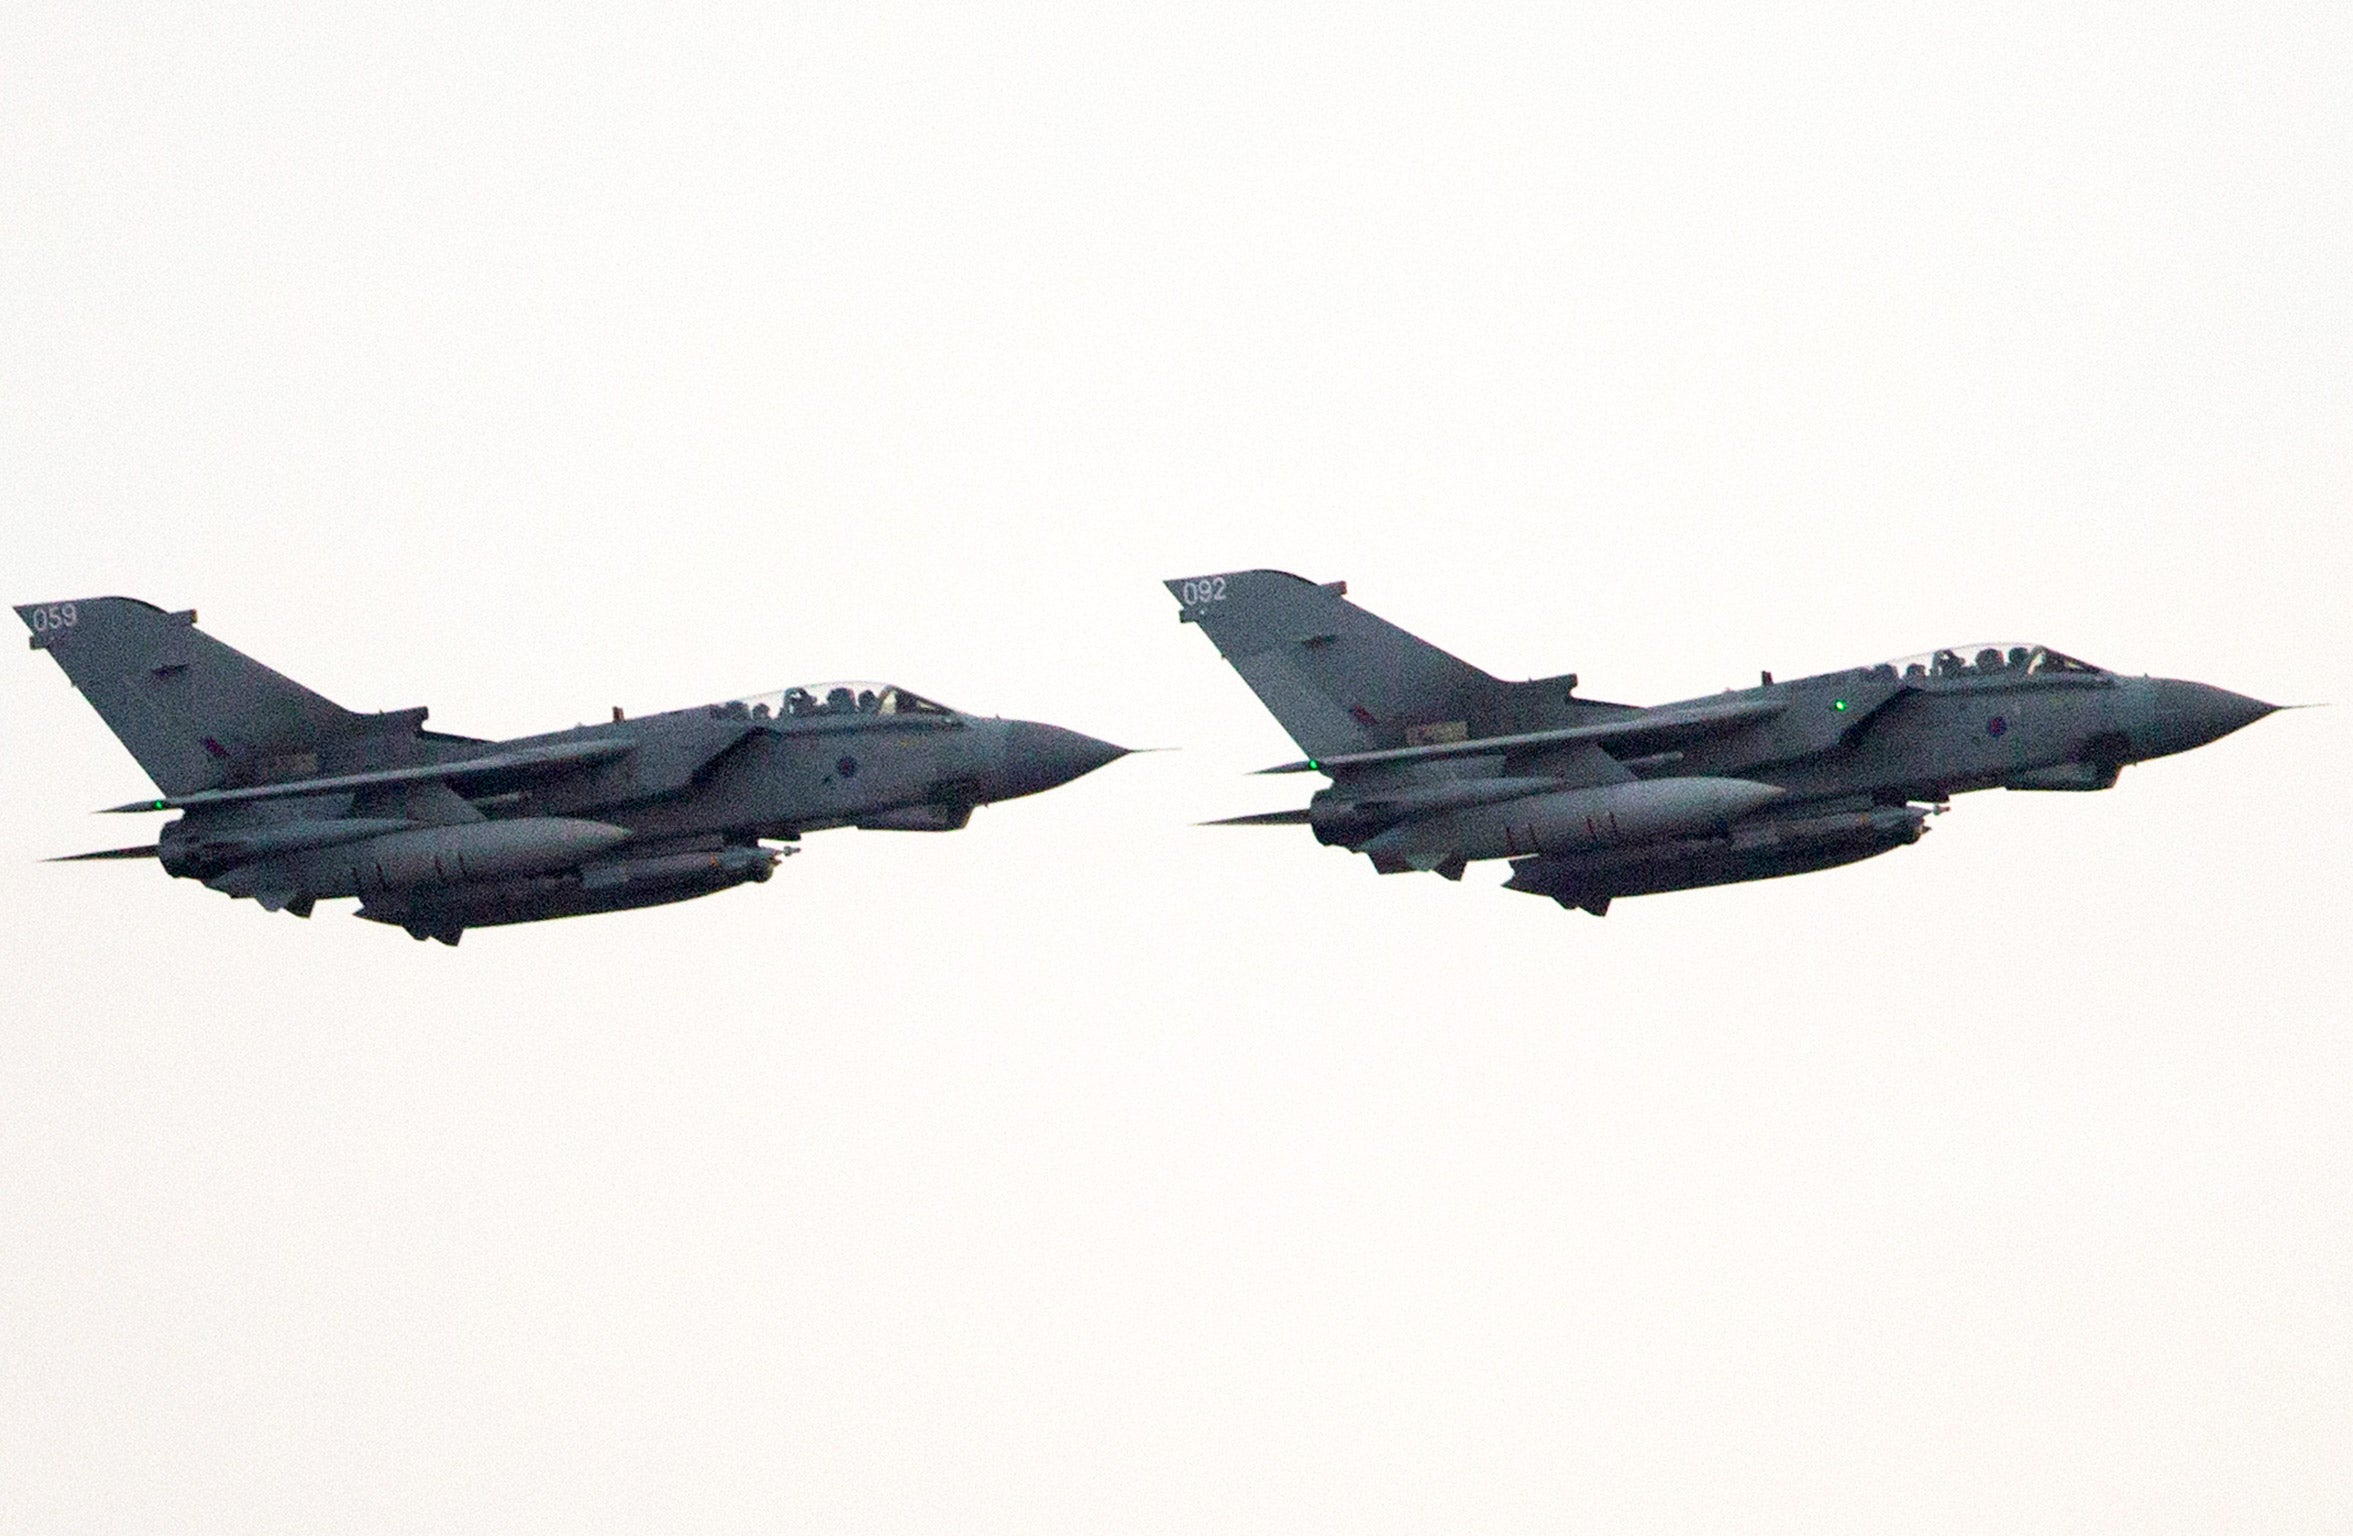 RAF Tornados, pictured, and unarmed Reaper drones have flown more than 1,000 missions in Iraq and Syria (Getty)